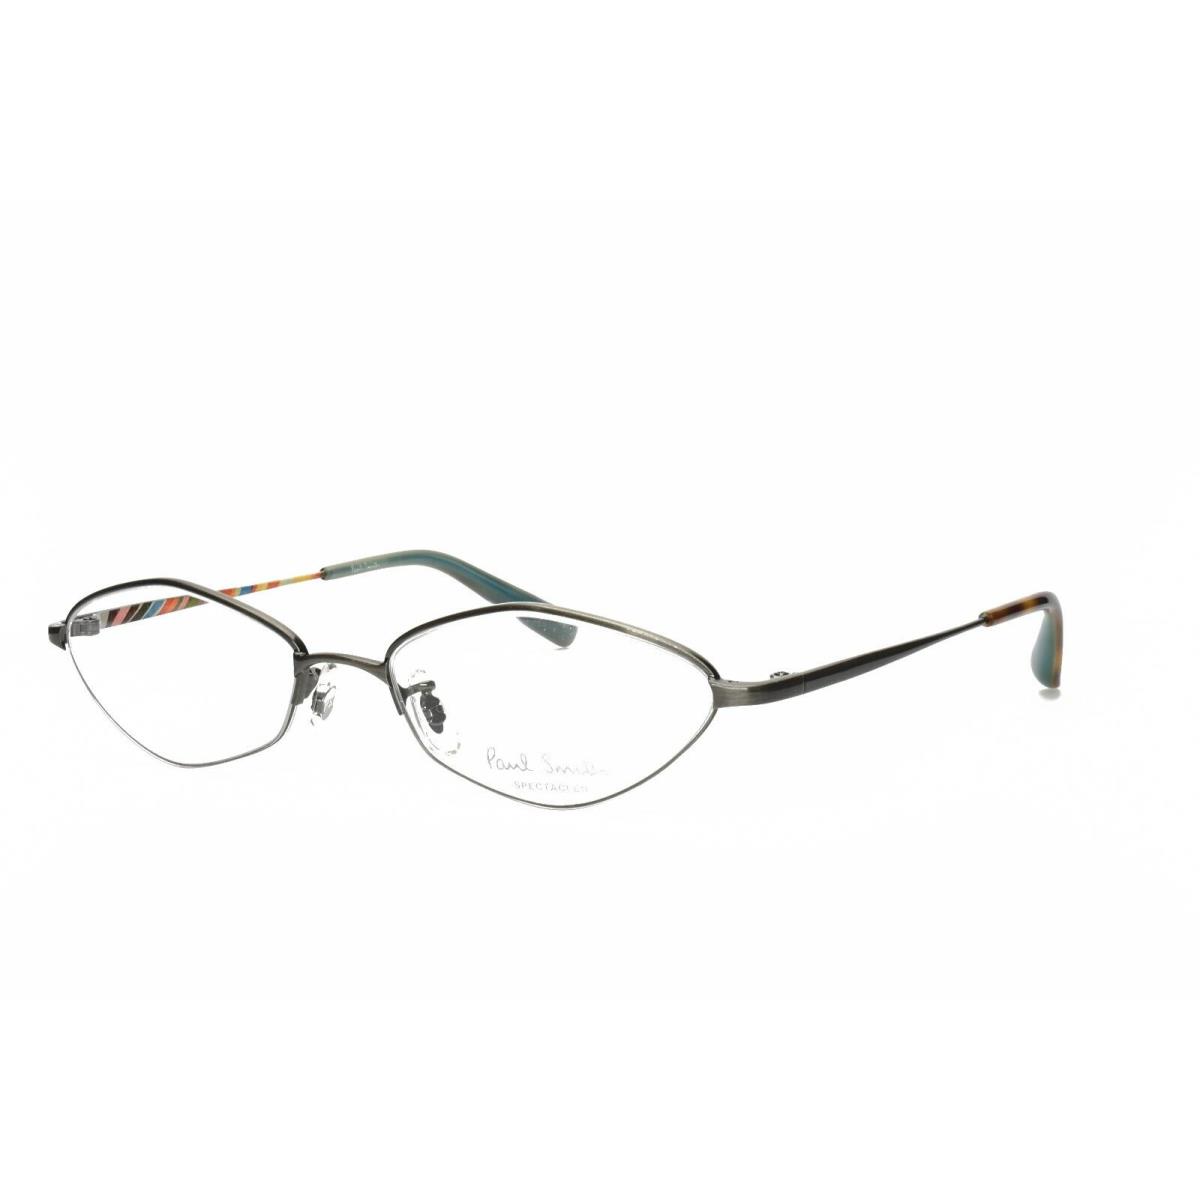 Paul Smith PS 1003 L Eyeglasses Frames Only 51-17-138